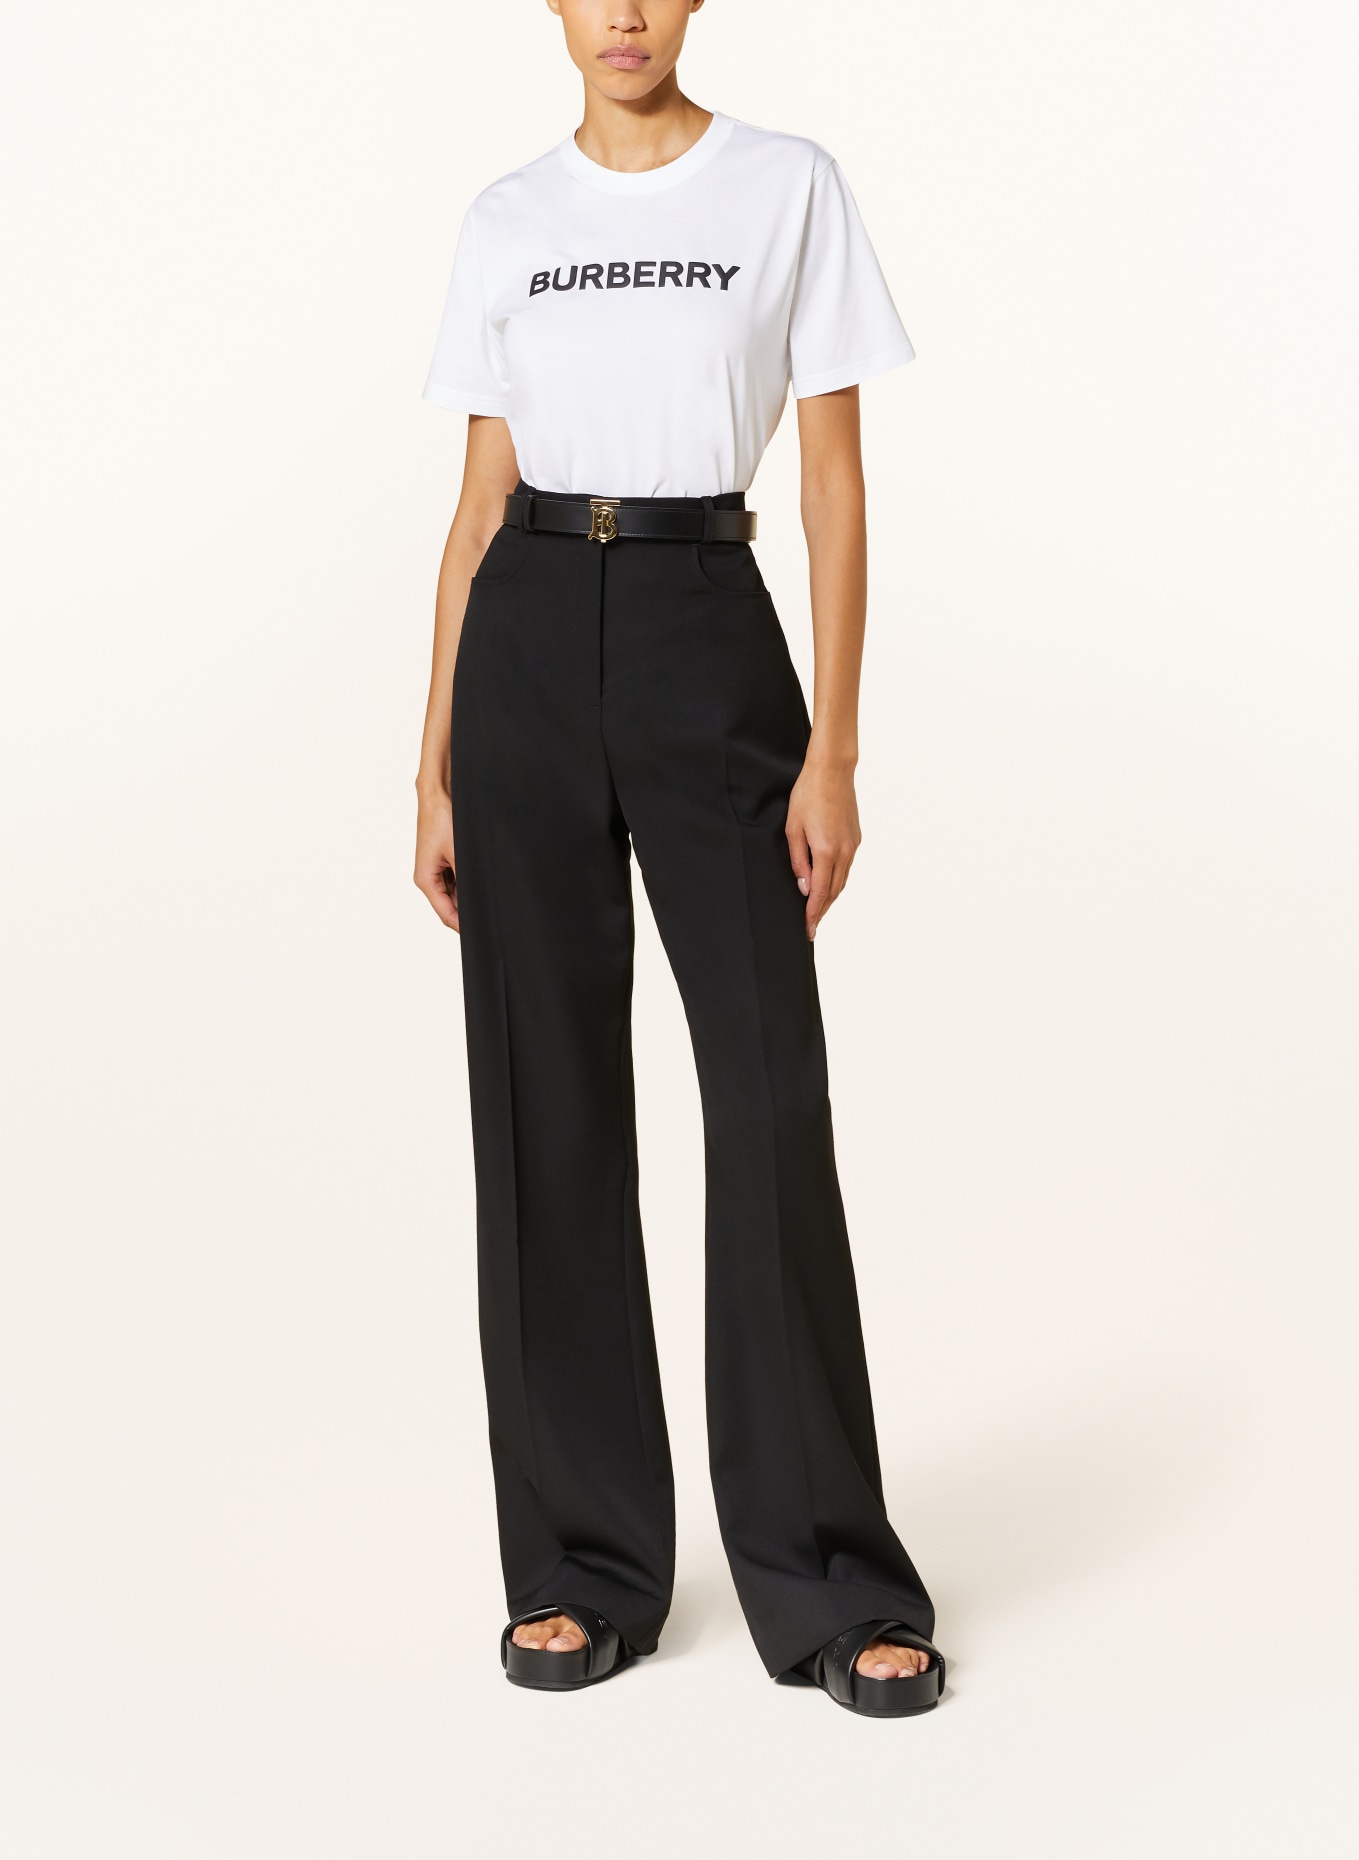 BURBERRY T-shirt MARGOT, Color: WHITE (Image 2)